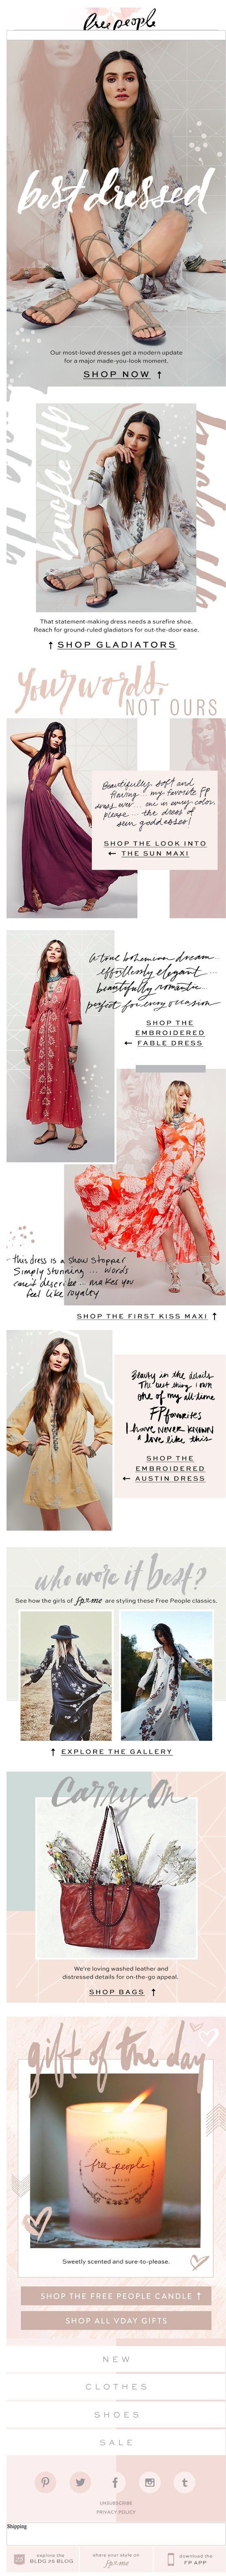 Free People ‘Holiday’ Email